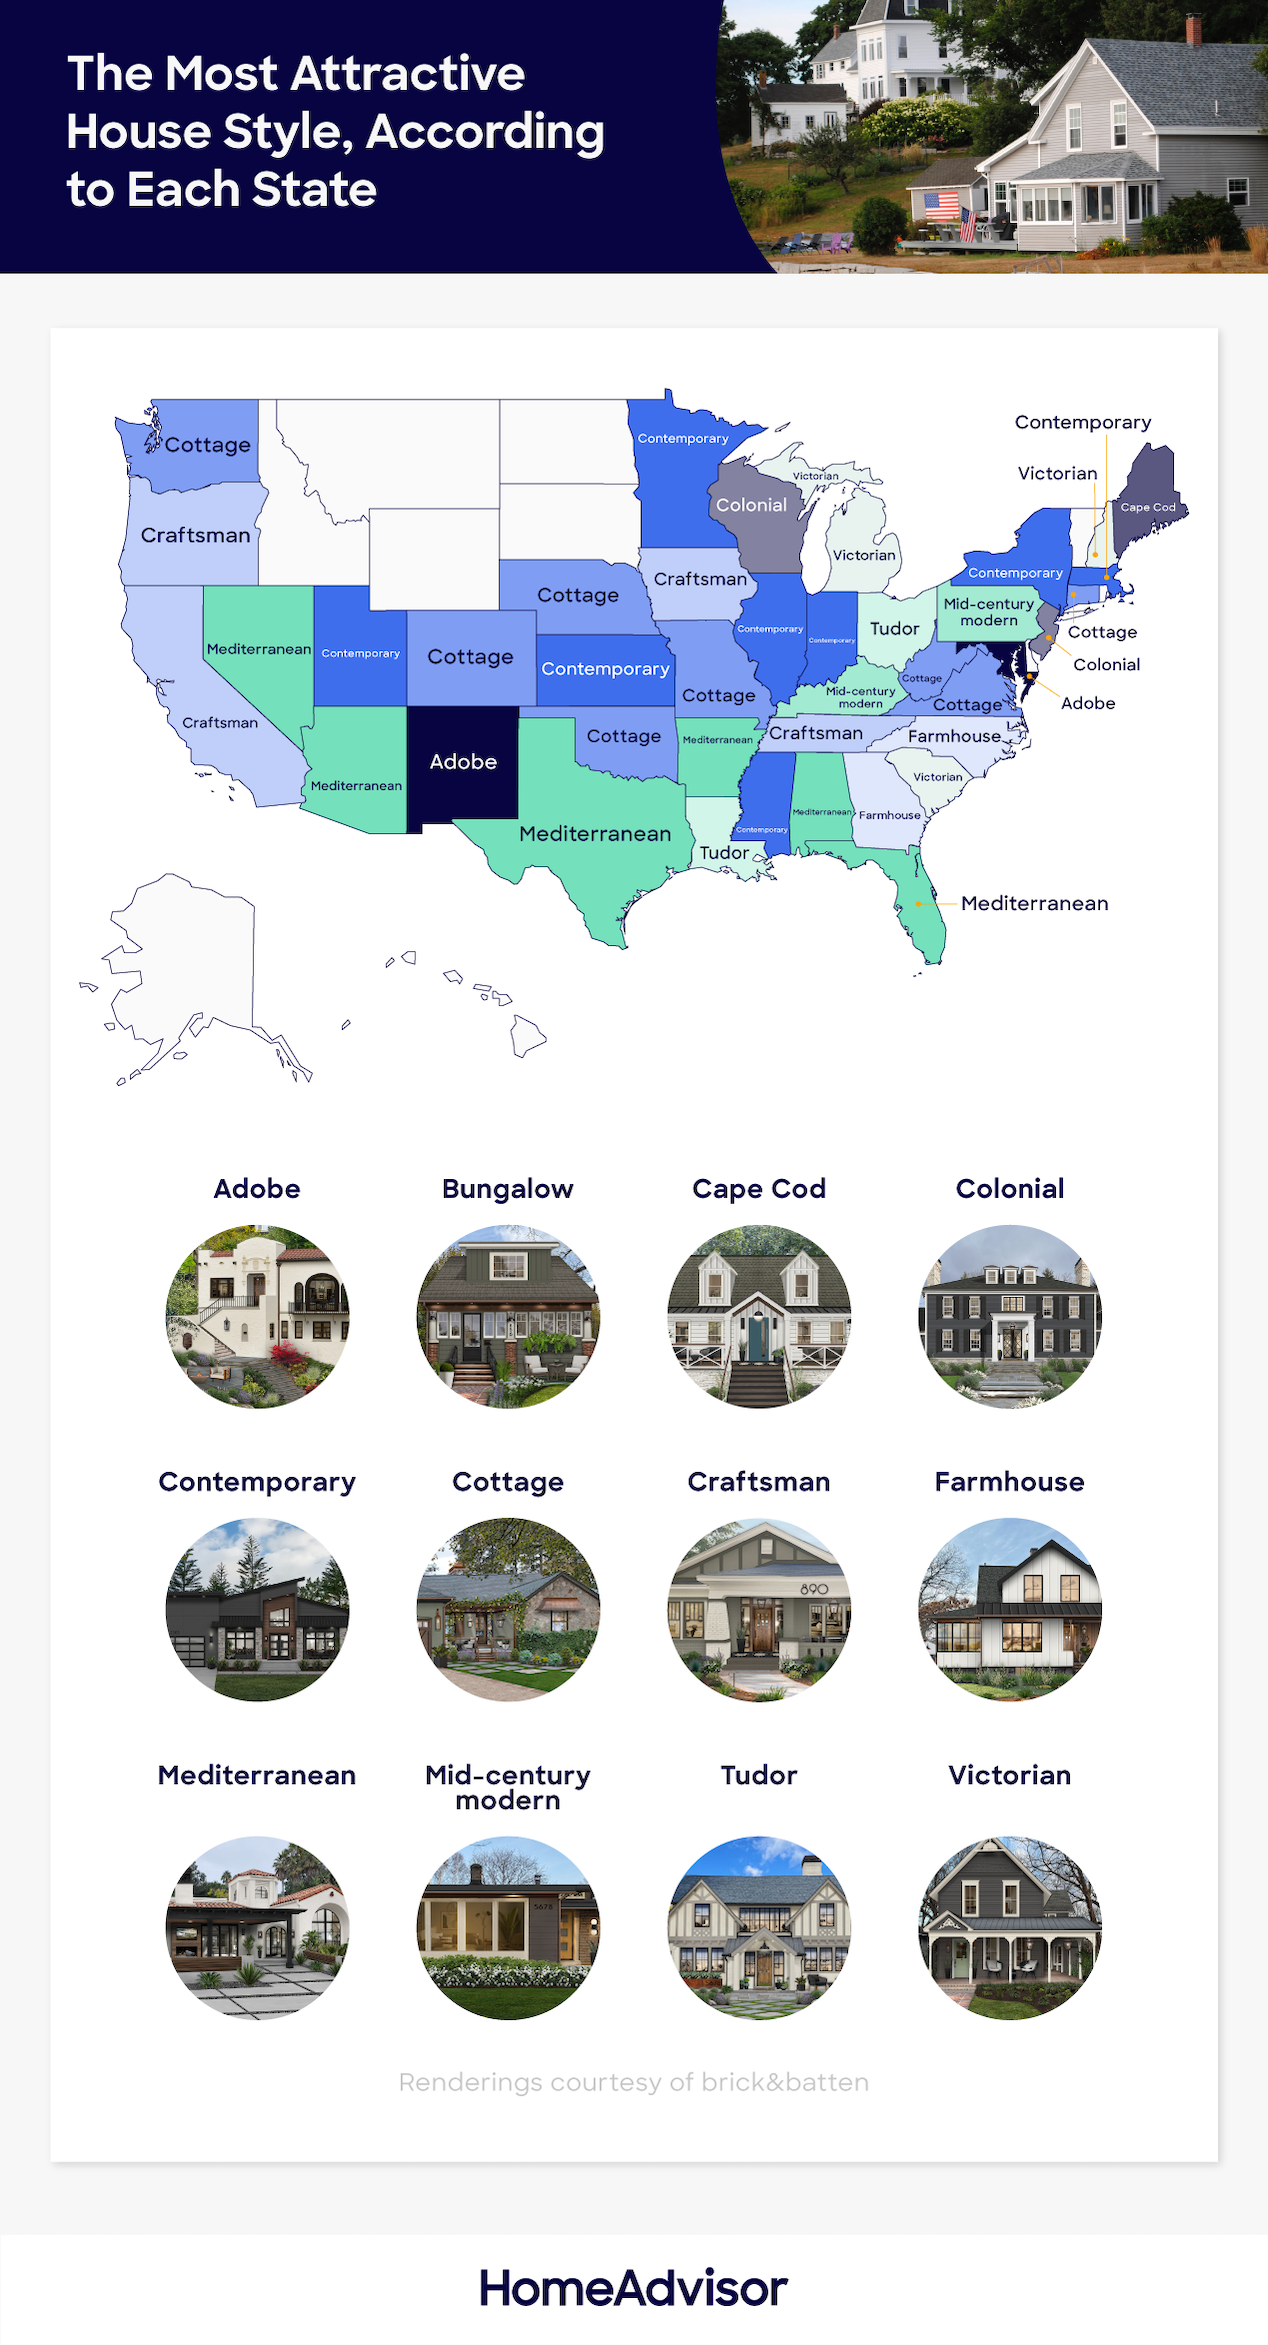 https://www.homeadvisor.com/r/wp-content/uploads/2022/06/most-popular-house-style-map.png